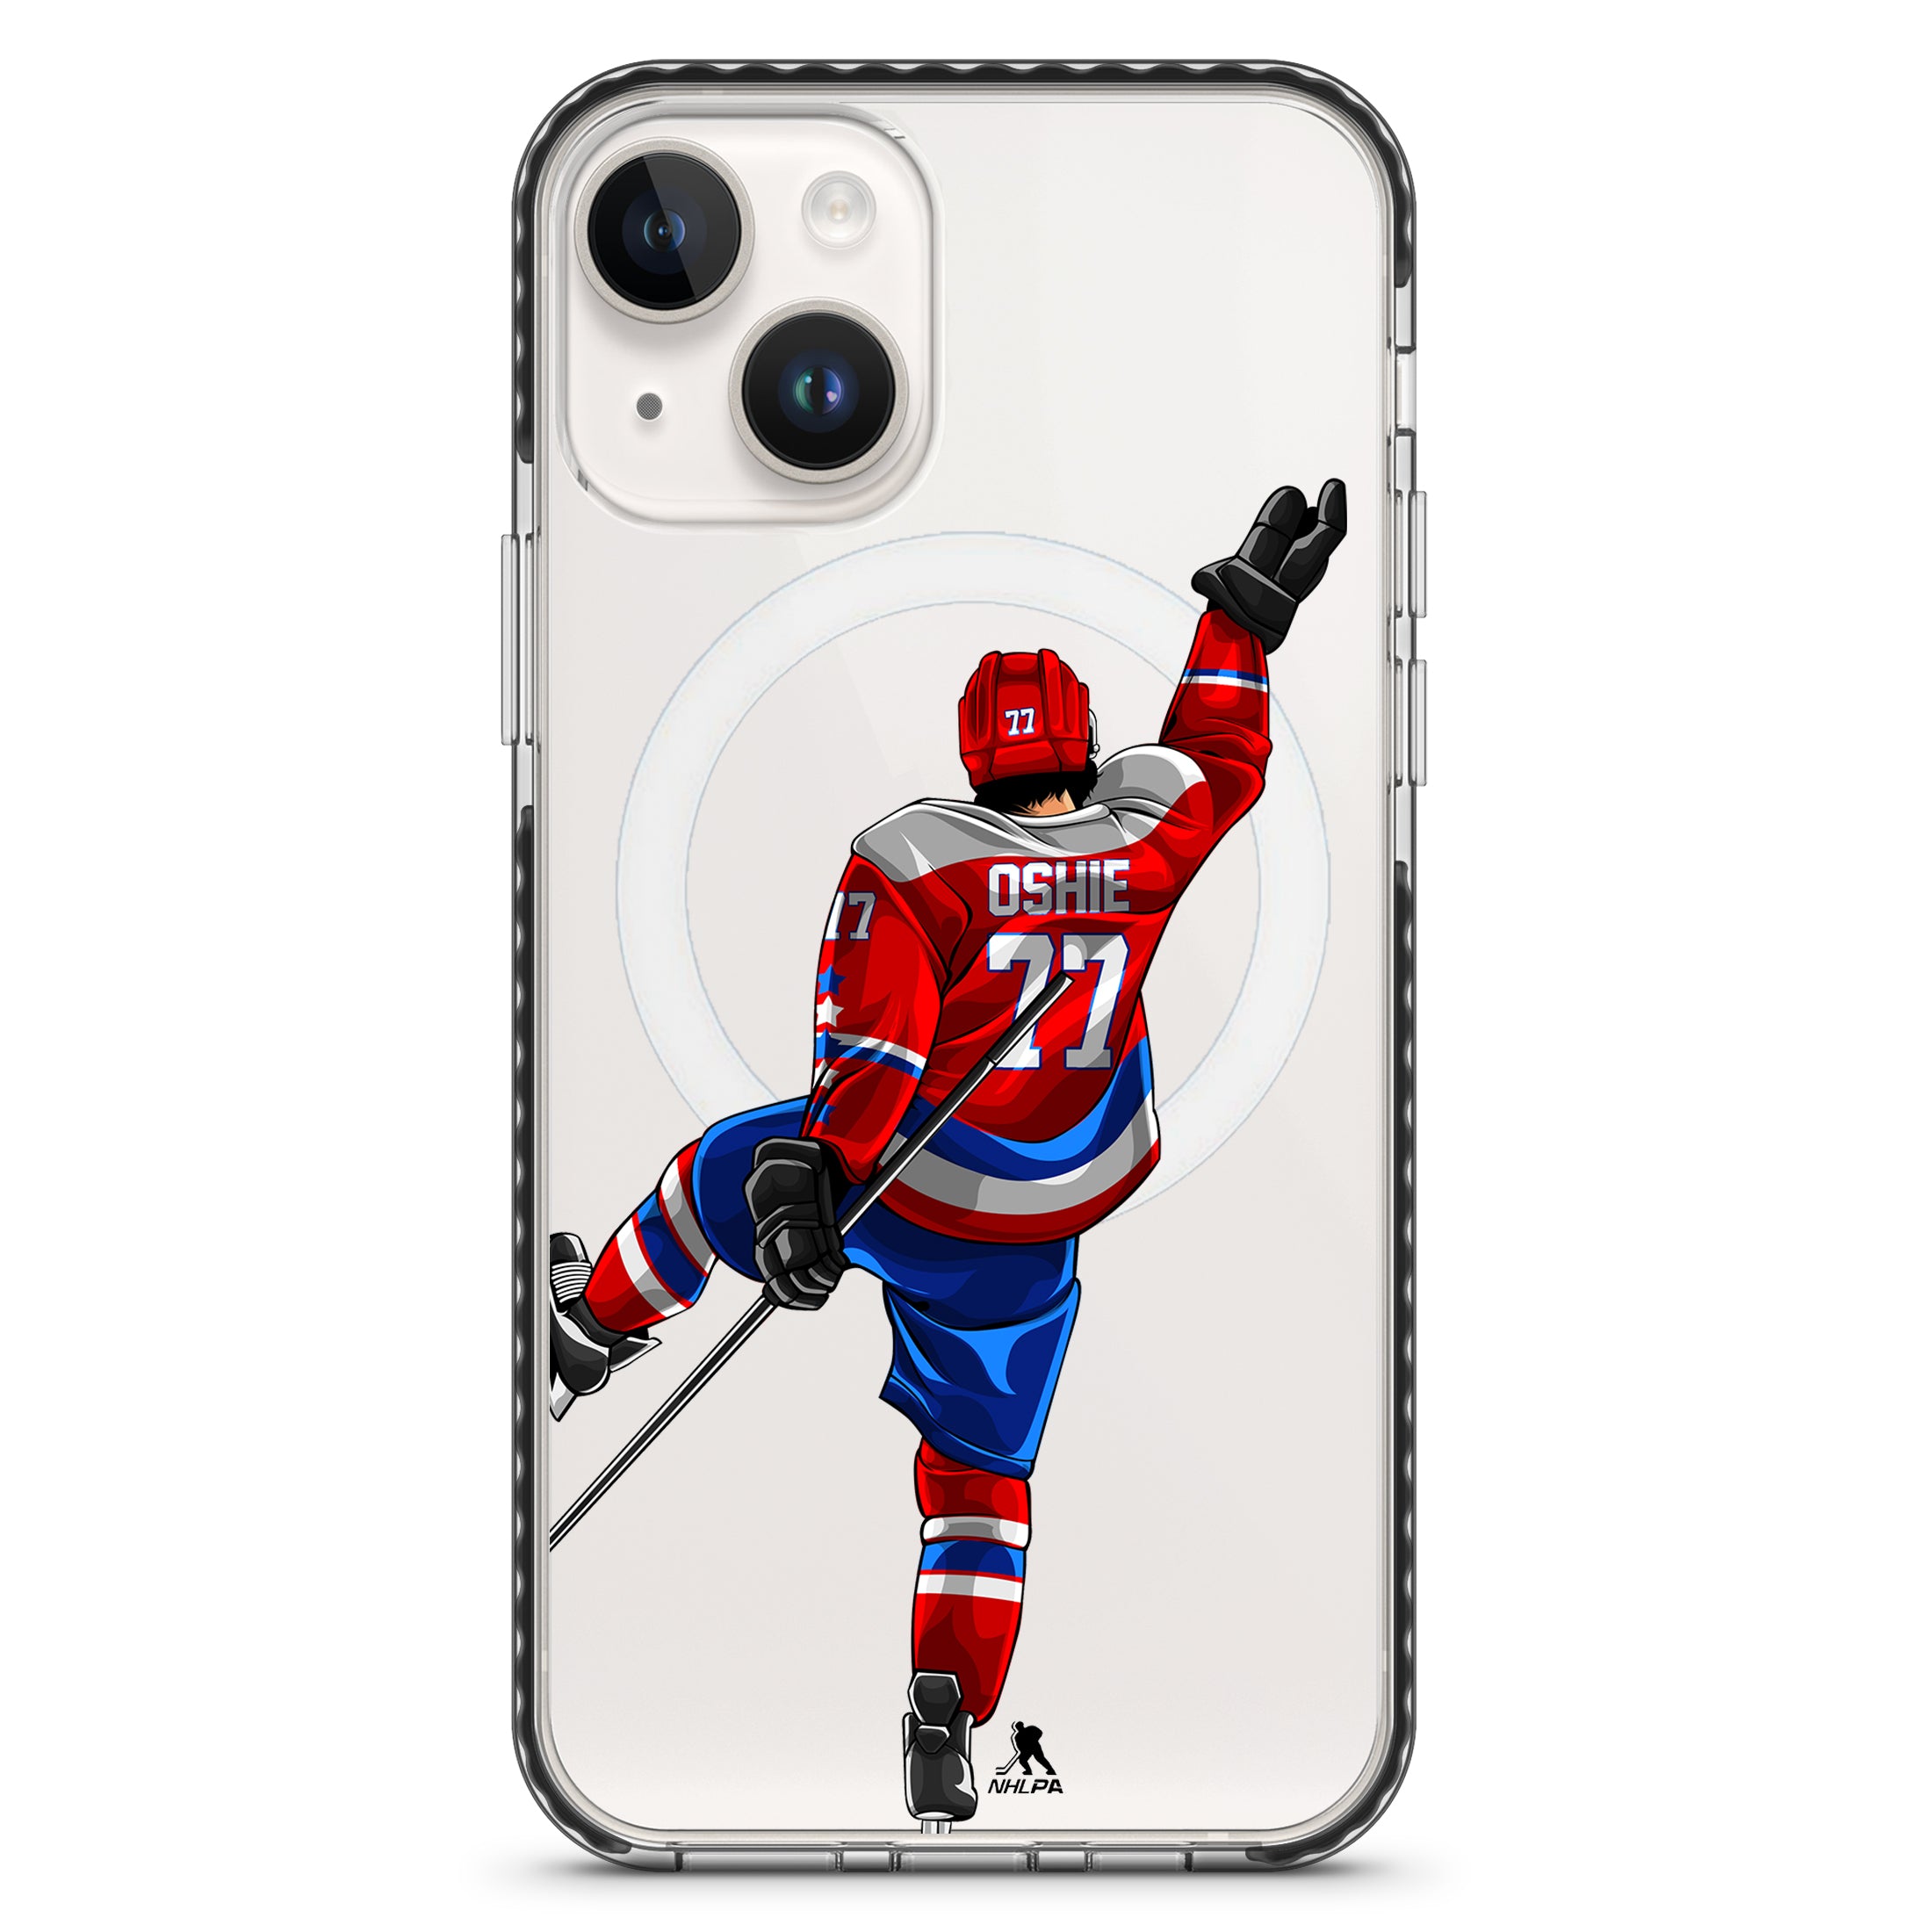 Oshie Clear Series 2.0 Phone Case